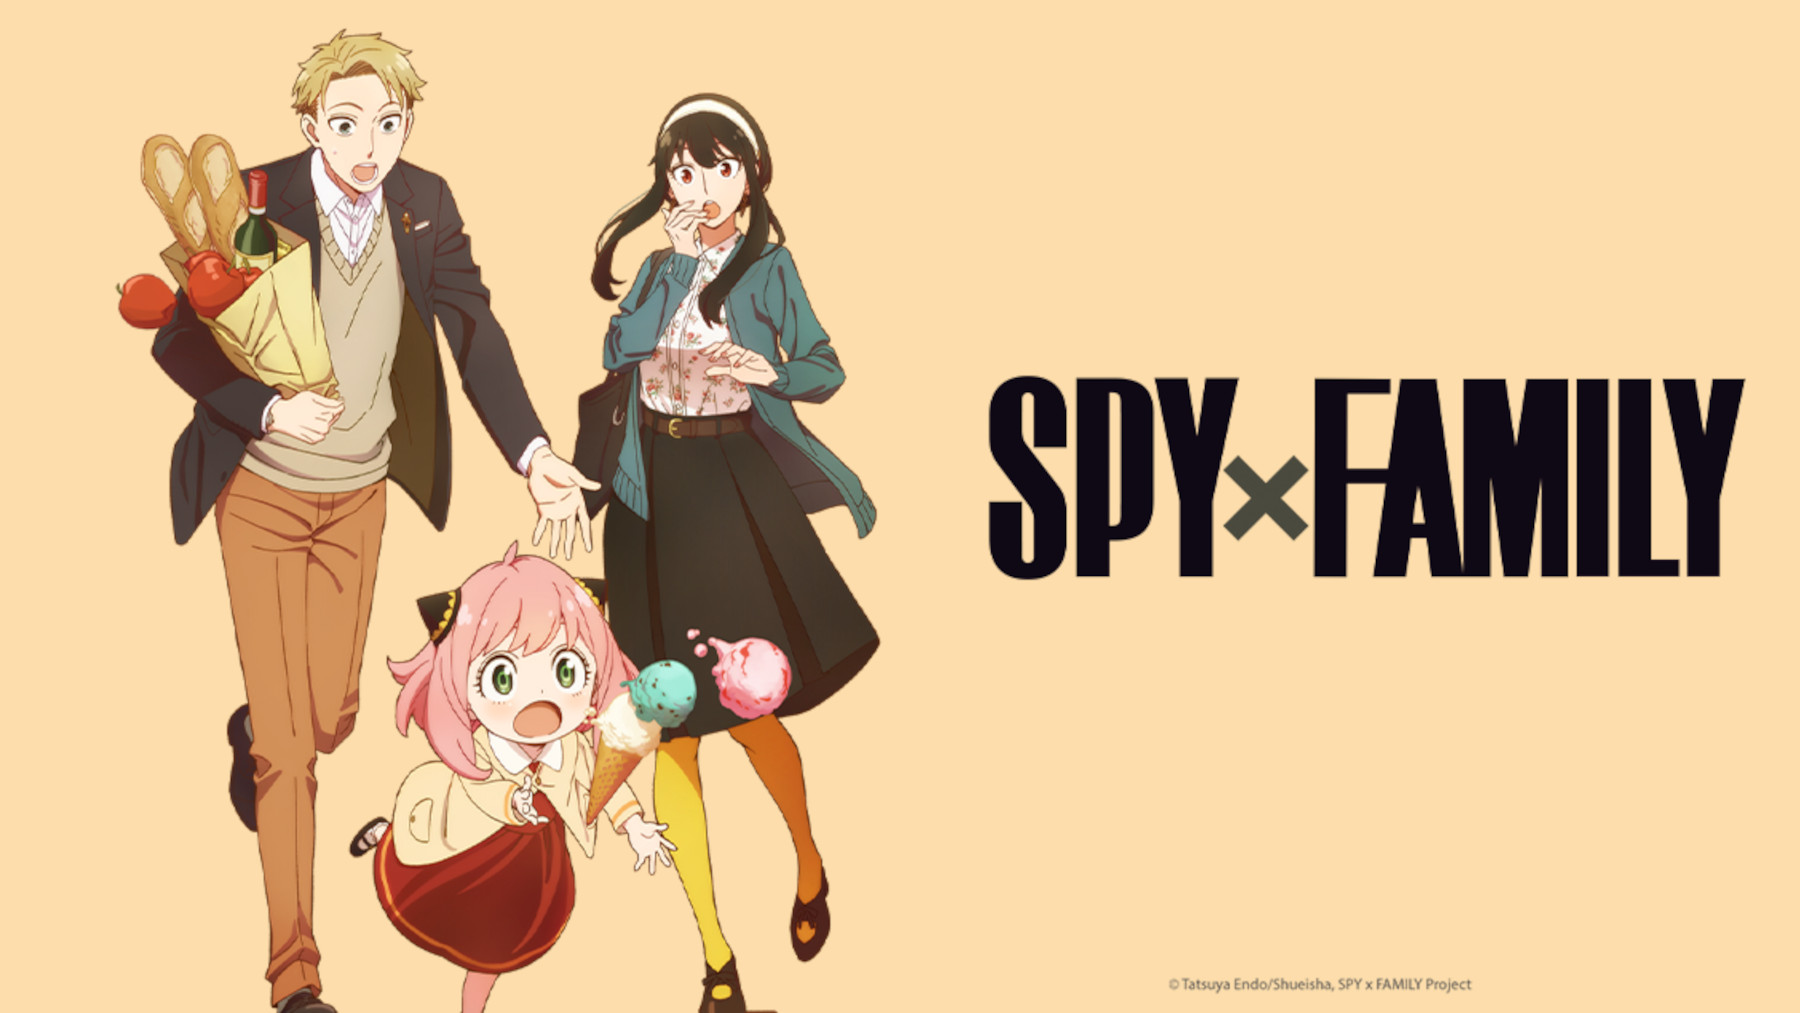 Spy x Family Part 2 Will Come Out This October